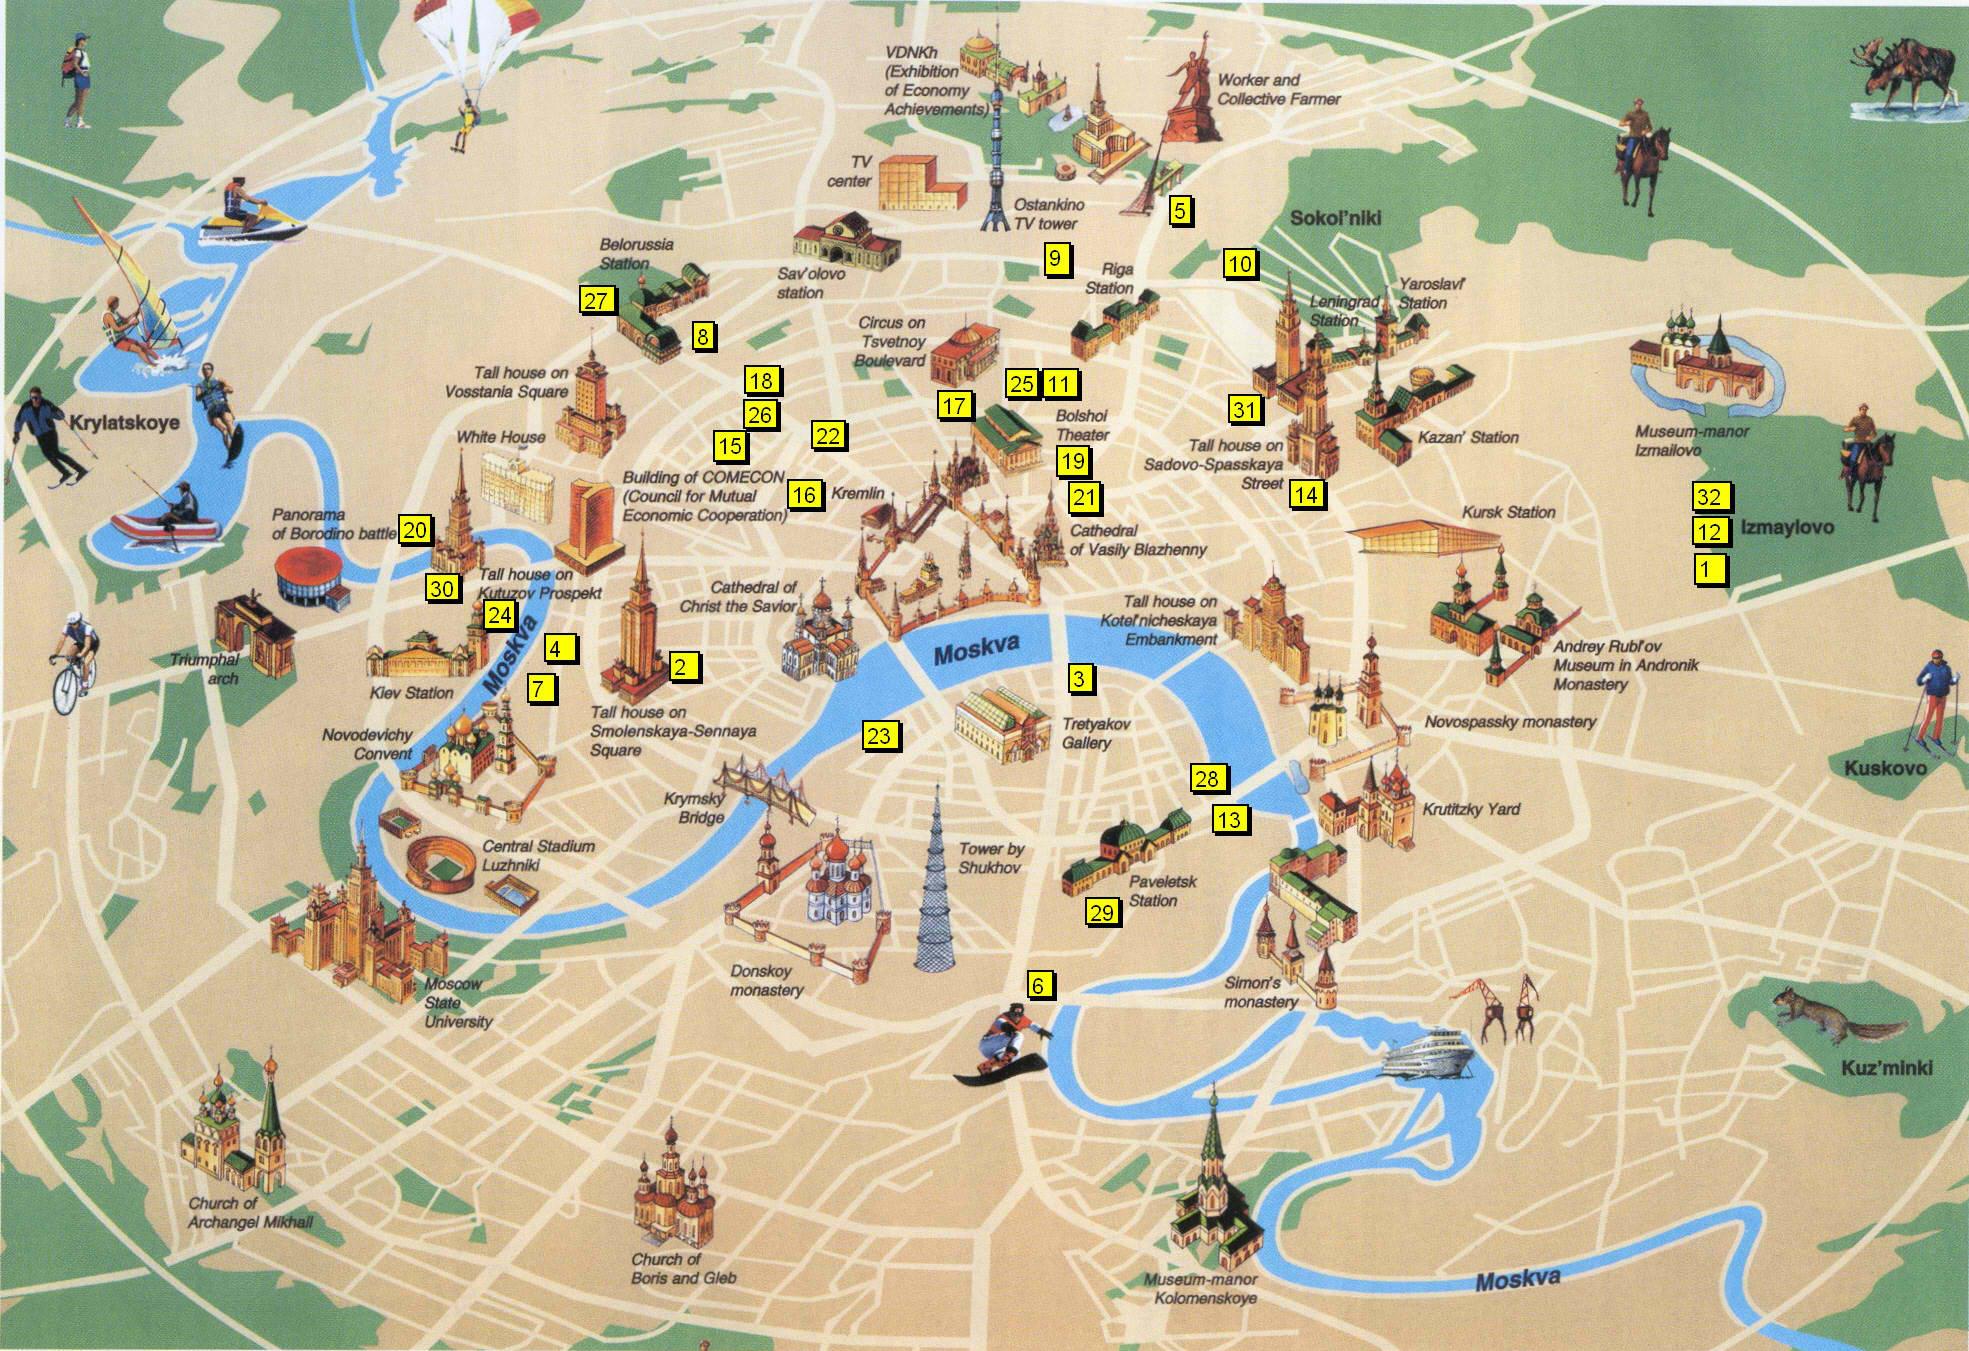 London tourist attractions map - Map of London tourist attractions